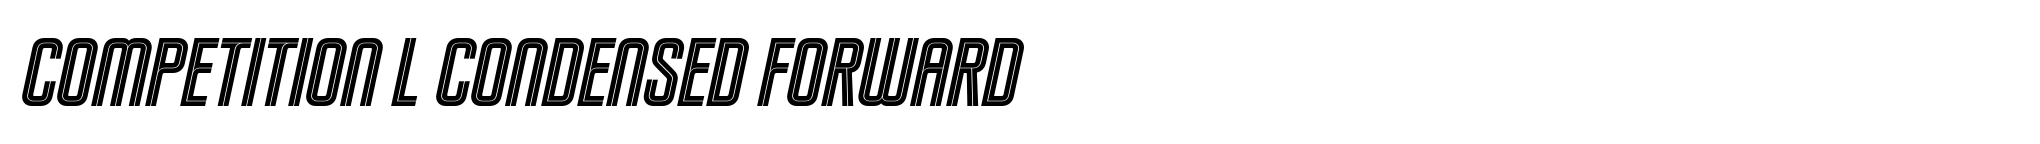 Competition L Condensed Forward image